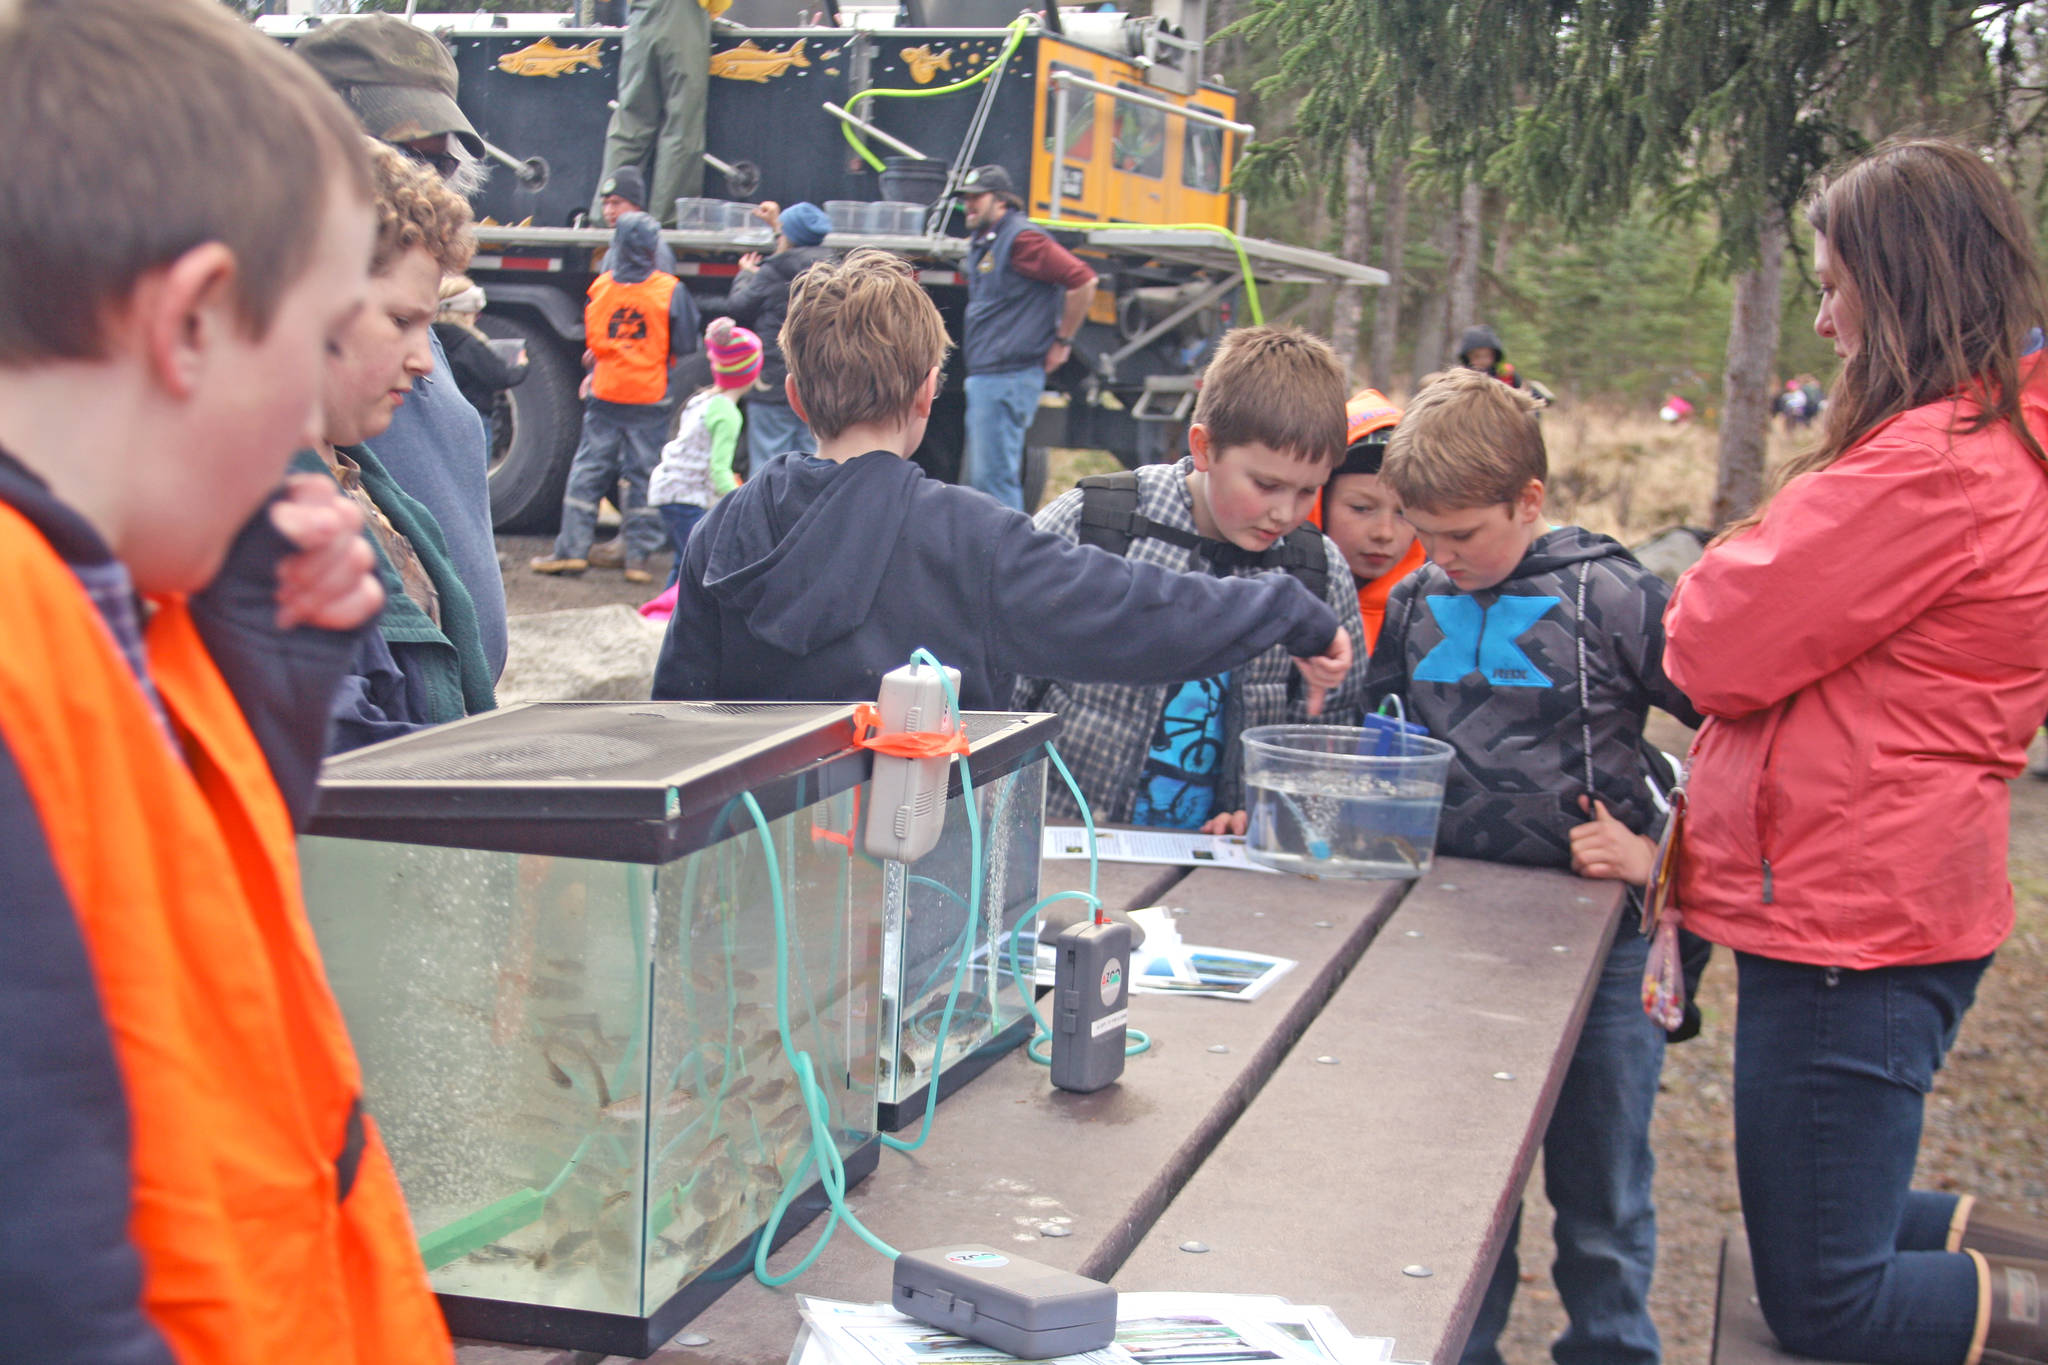 Students examine juvenile fish at one of the educational stations at the 18th Annual Kenai Peninsula Salmon Celebration at Johnson Lake State Recreation Site in Kasilof. Approximately 950 borough students released 5,000 fish into Johnson Lake as part of a restocking effort. (Photo by Erin Thompson/Peninsula Clarion)